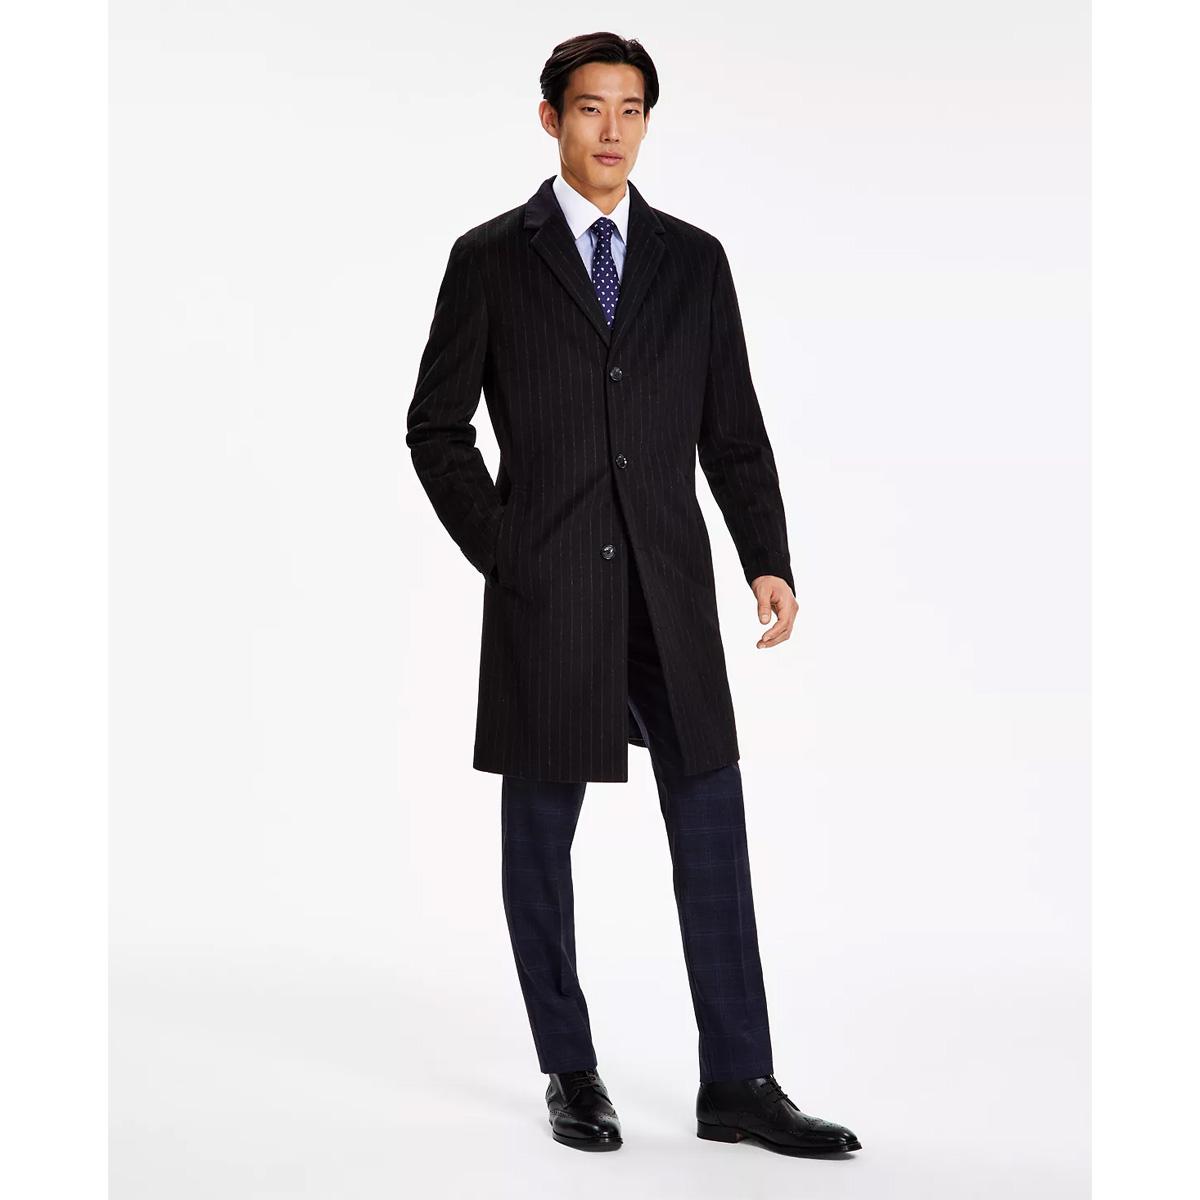 Tommy Hilfiger Mens Addison Wool-Blend Trim Fit Overcoat for $69.13 Shipped